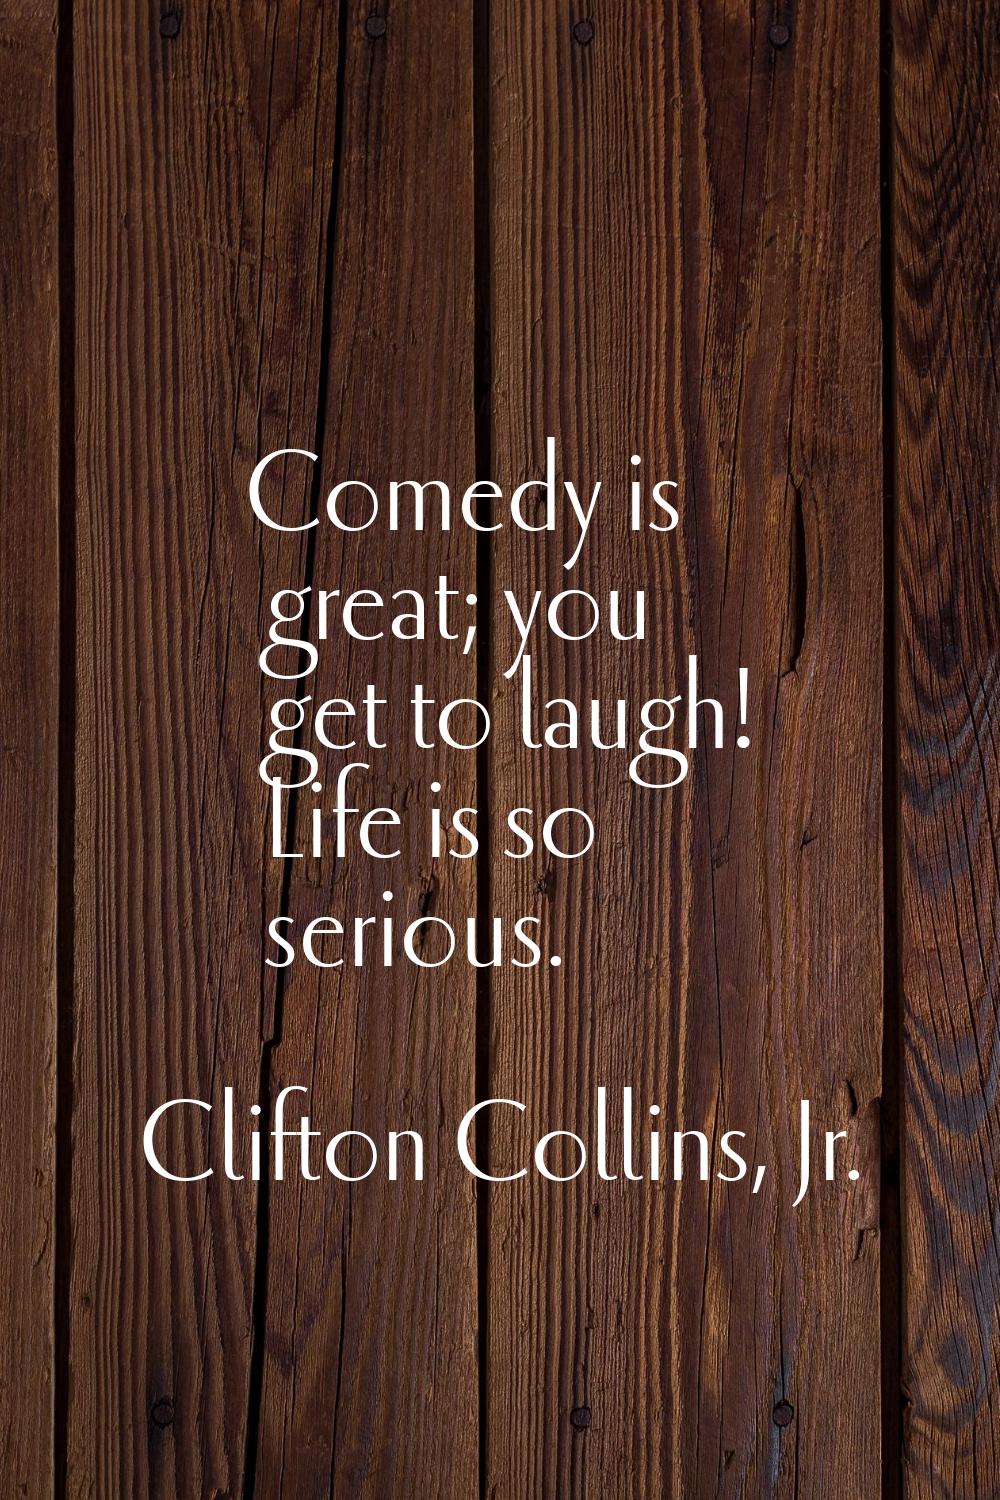 Comedy is great; you get to laugh! Life is so serious.